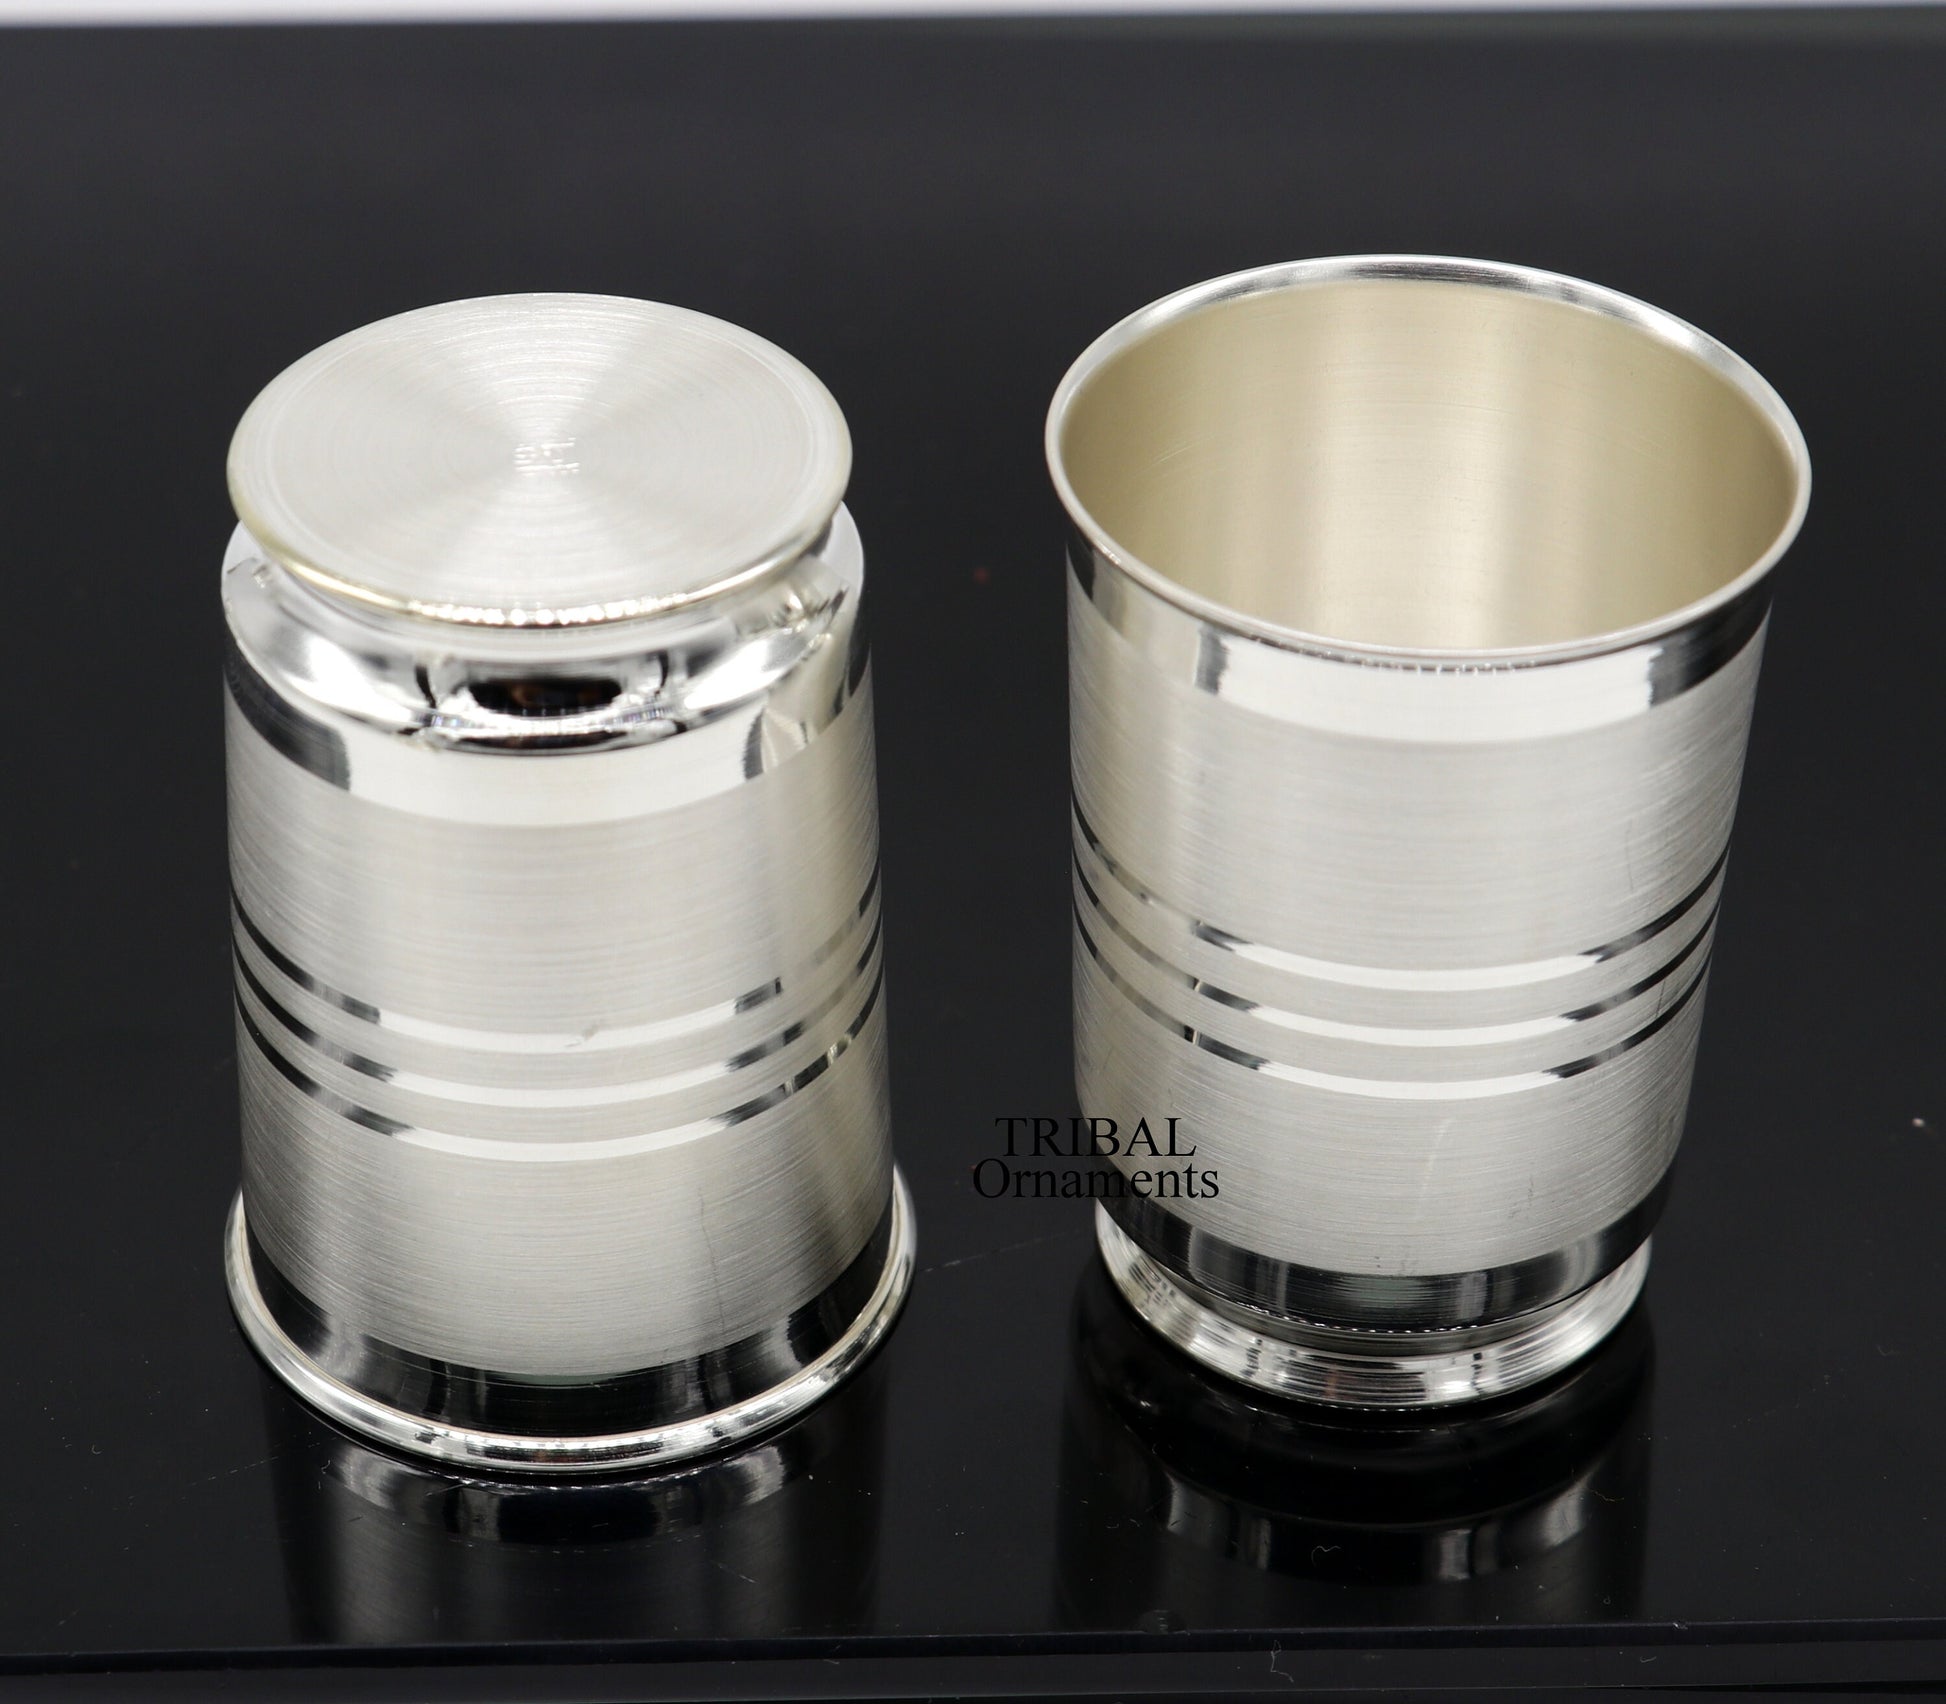 999 pure fine silver handmade water milk cup tumbler, all sizes silver tumbler, silver baby food dining flask, silver utensils gift sv262 - TRIBAL ORNAMENTS